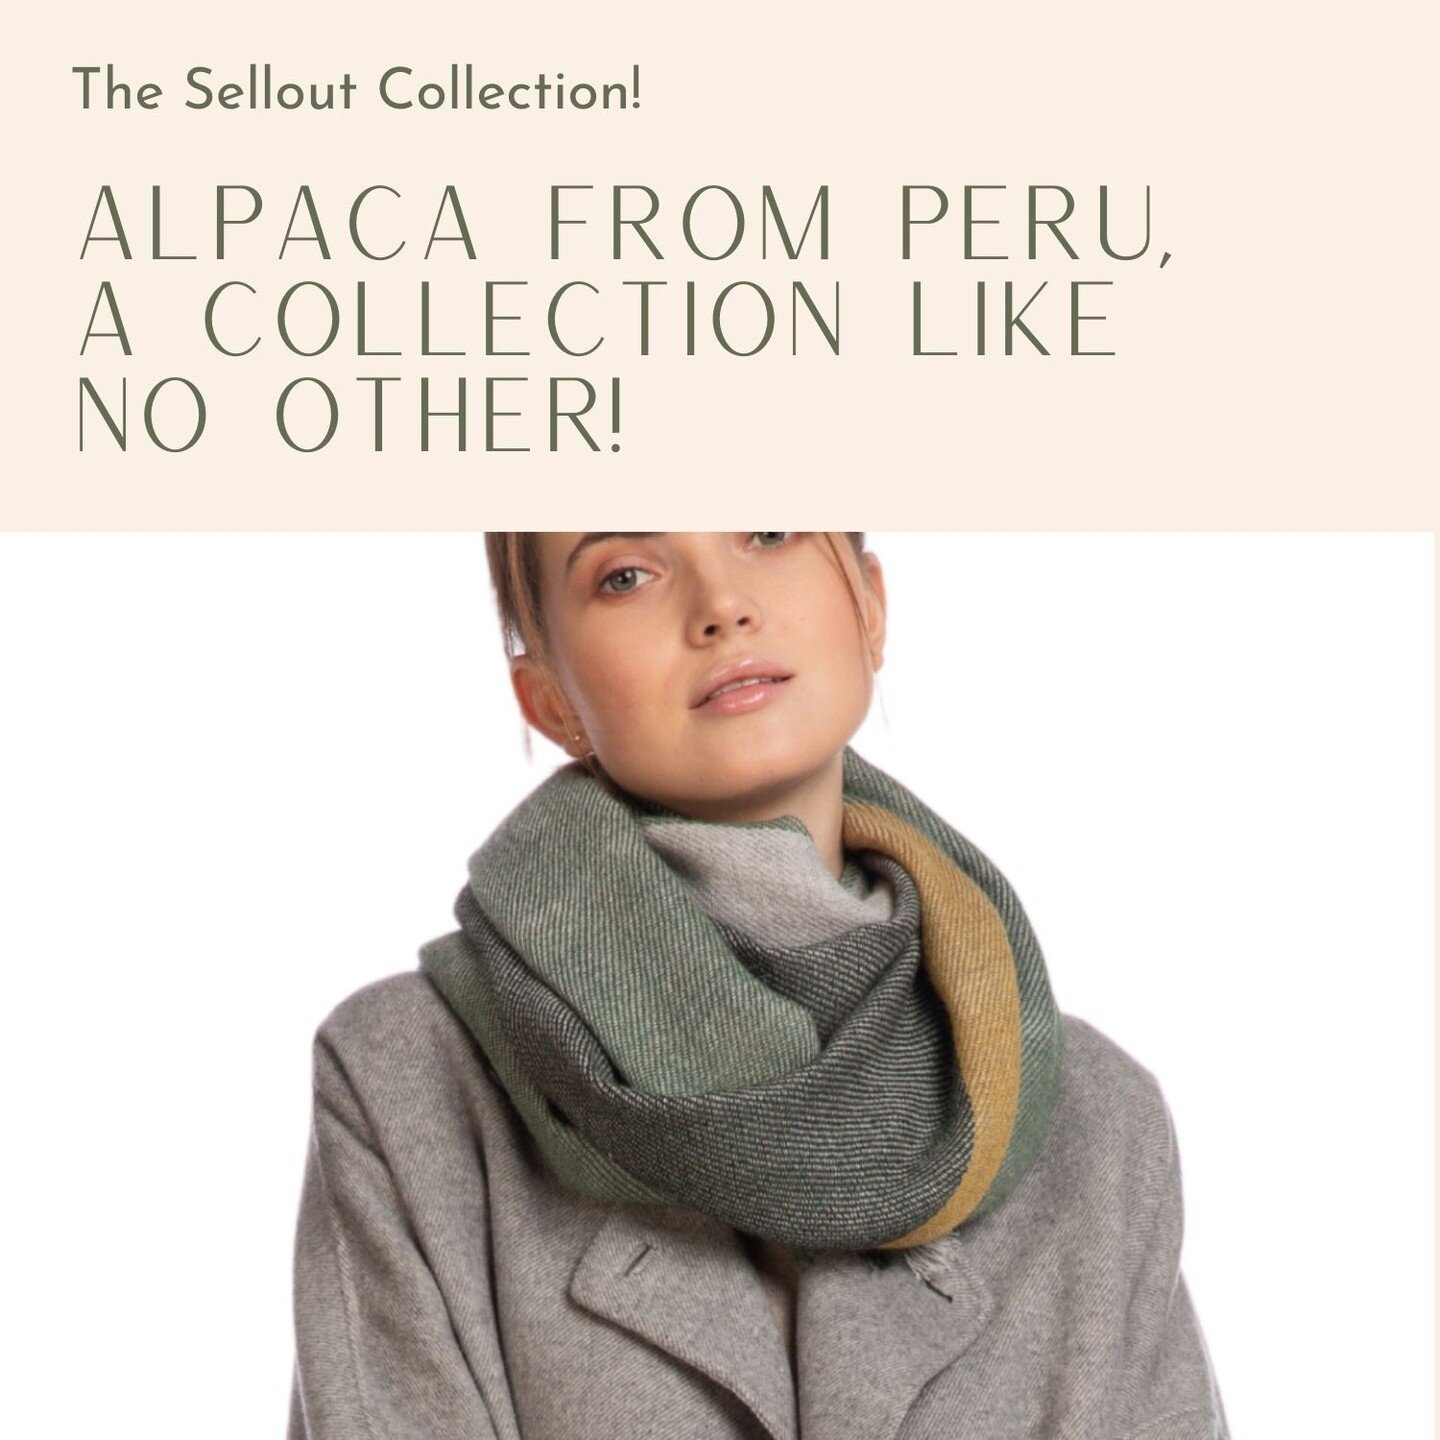 ✨Welcome to the Peru Collection! ✨

Made from Peruvian pure baby alpaca soft fibre, this collection is inspired by the stunning Rainbow Mountain in the Andes. Our popular Picchu Green perfectly captures the yellows and greens of the mountain and has 